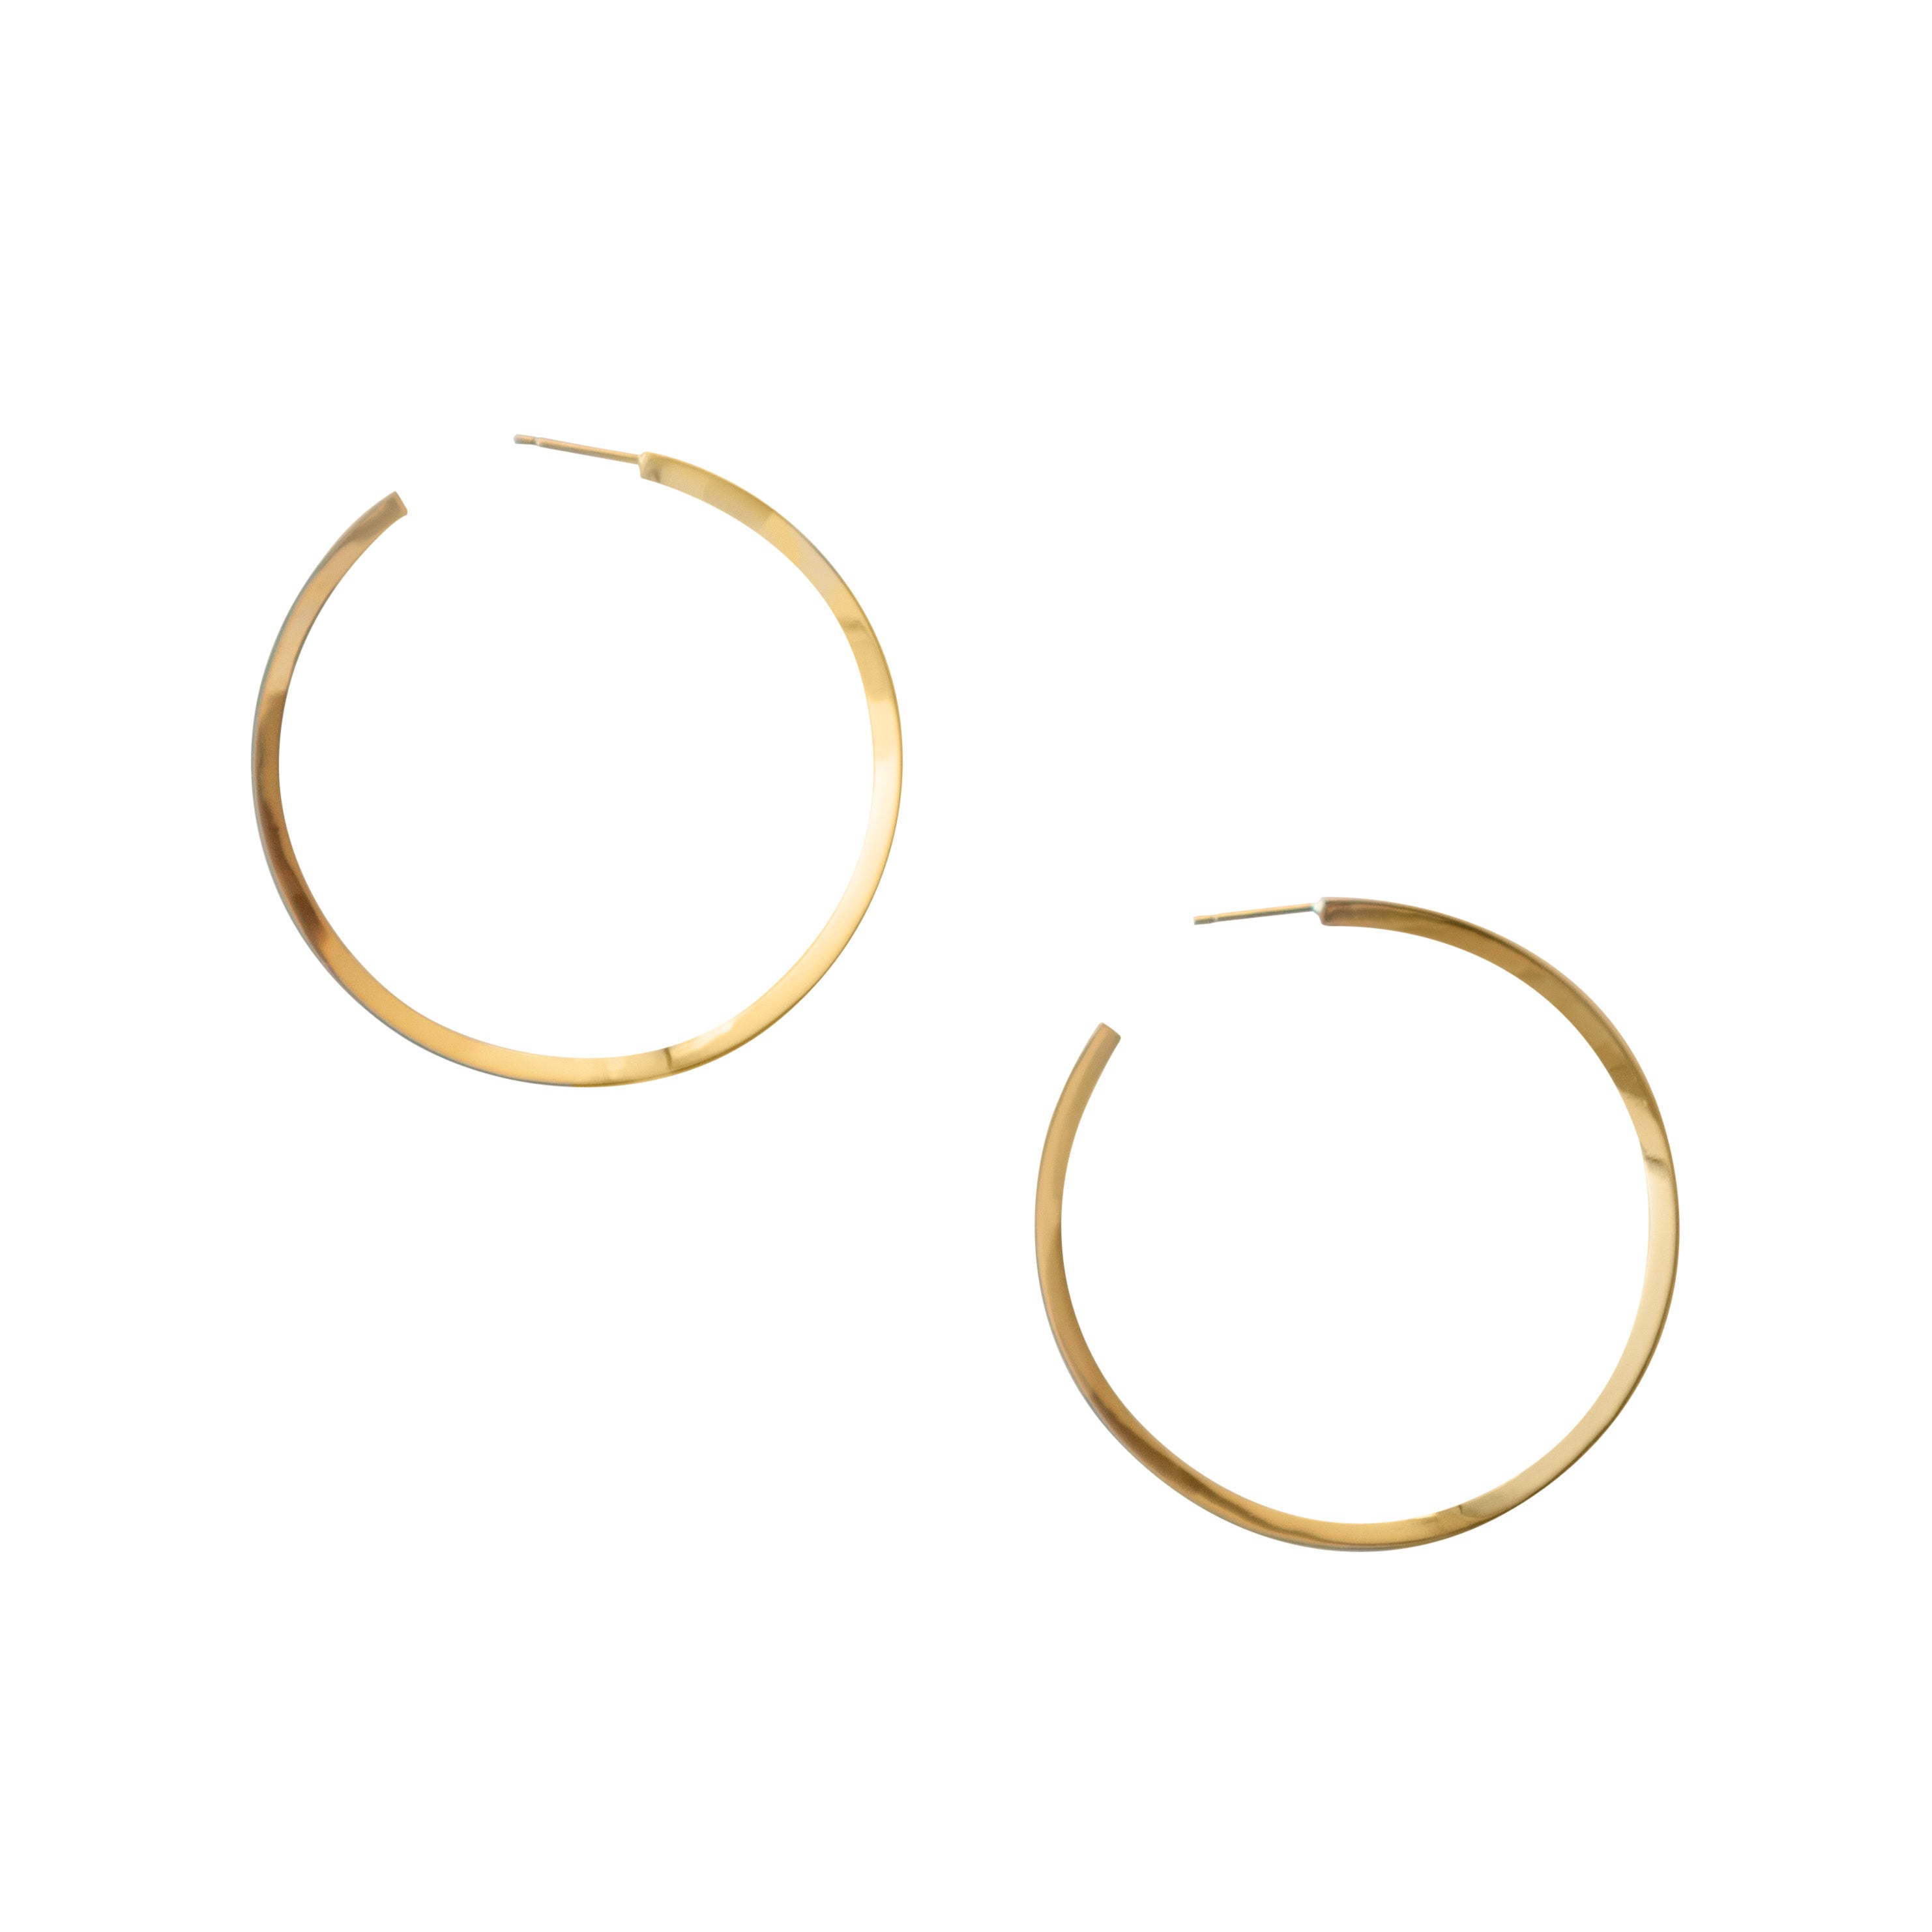 Handmade Extra Large Kai Hoops in 14k Yellow Gold by SHW Fine Jewelry made in NYC